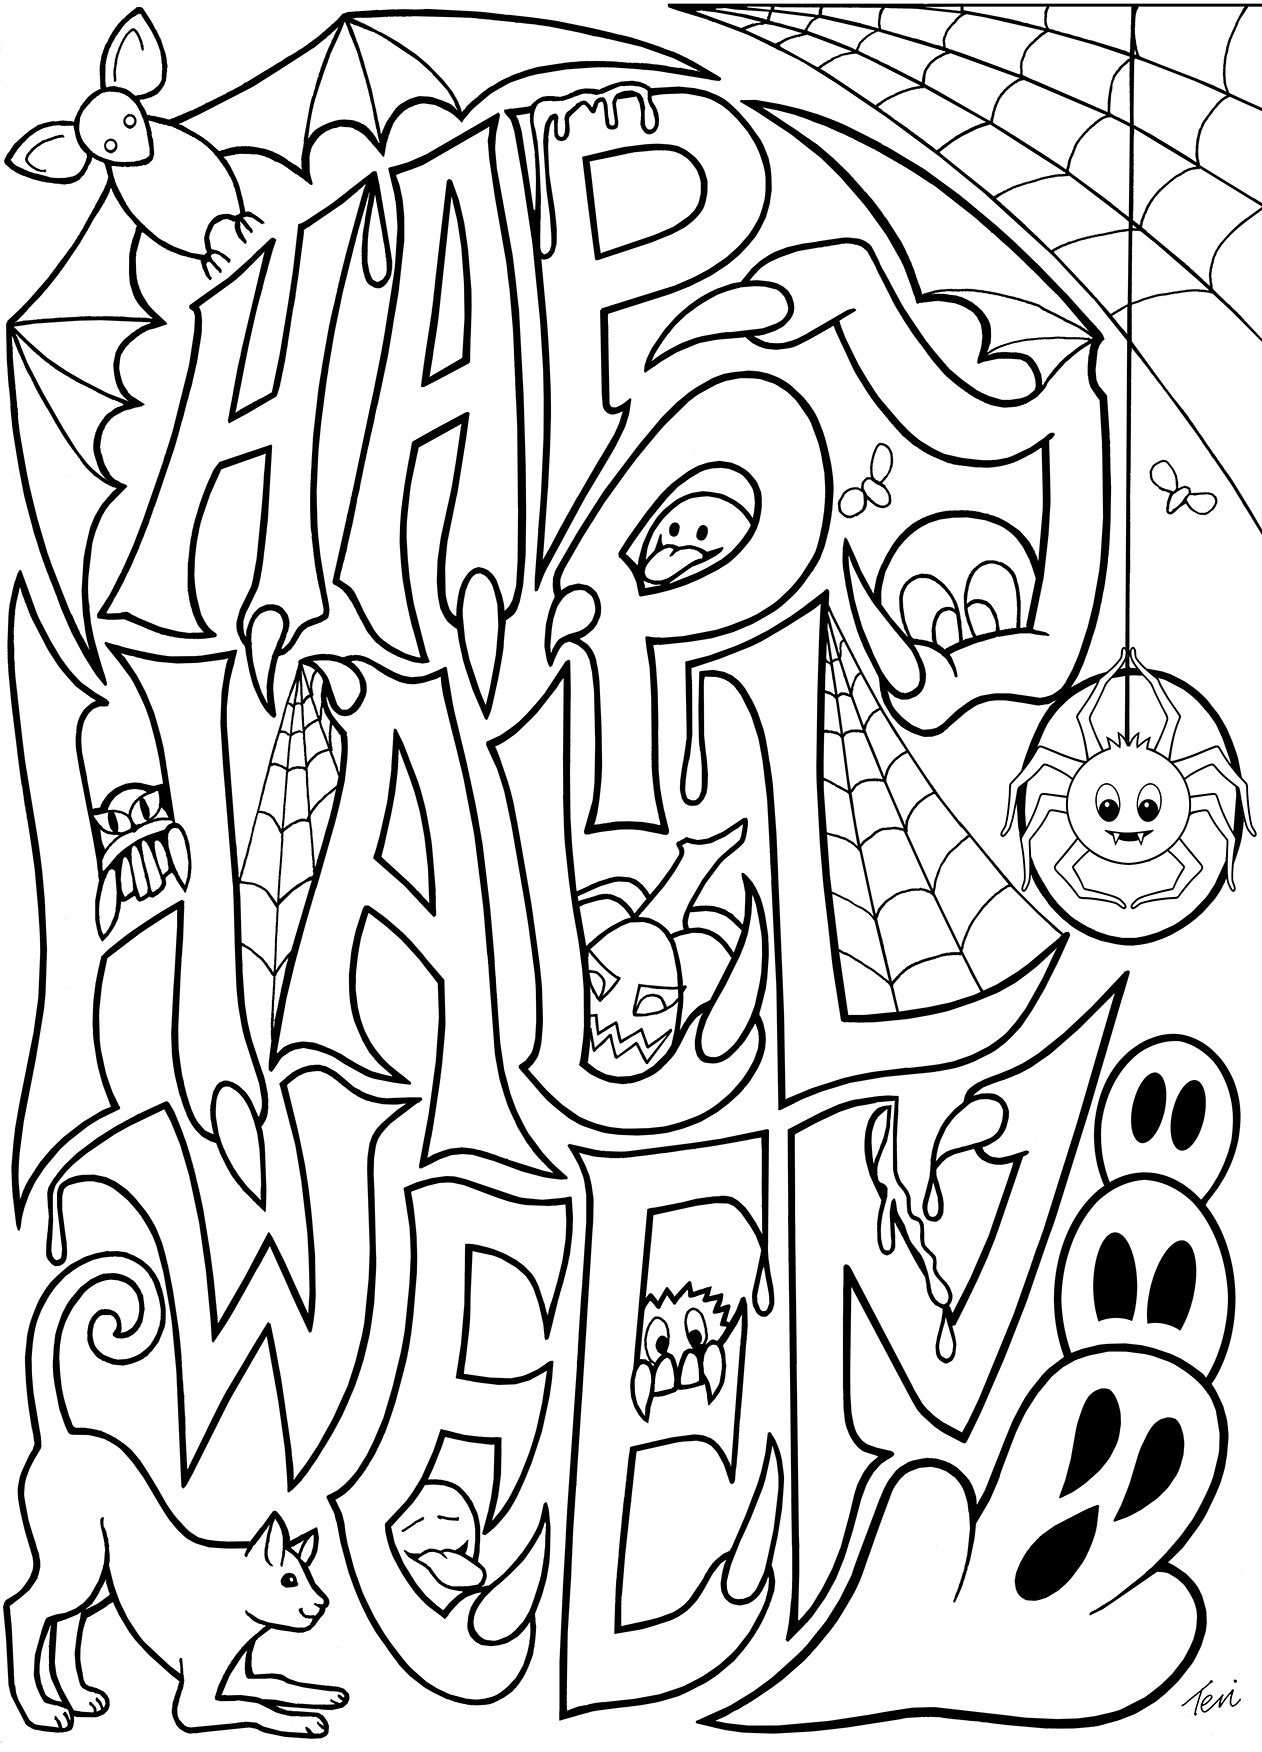 Adult Coloring Pages Halloween
 Free Adult Coloring Book Pages Happy Halloween by Blue